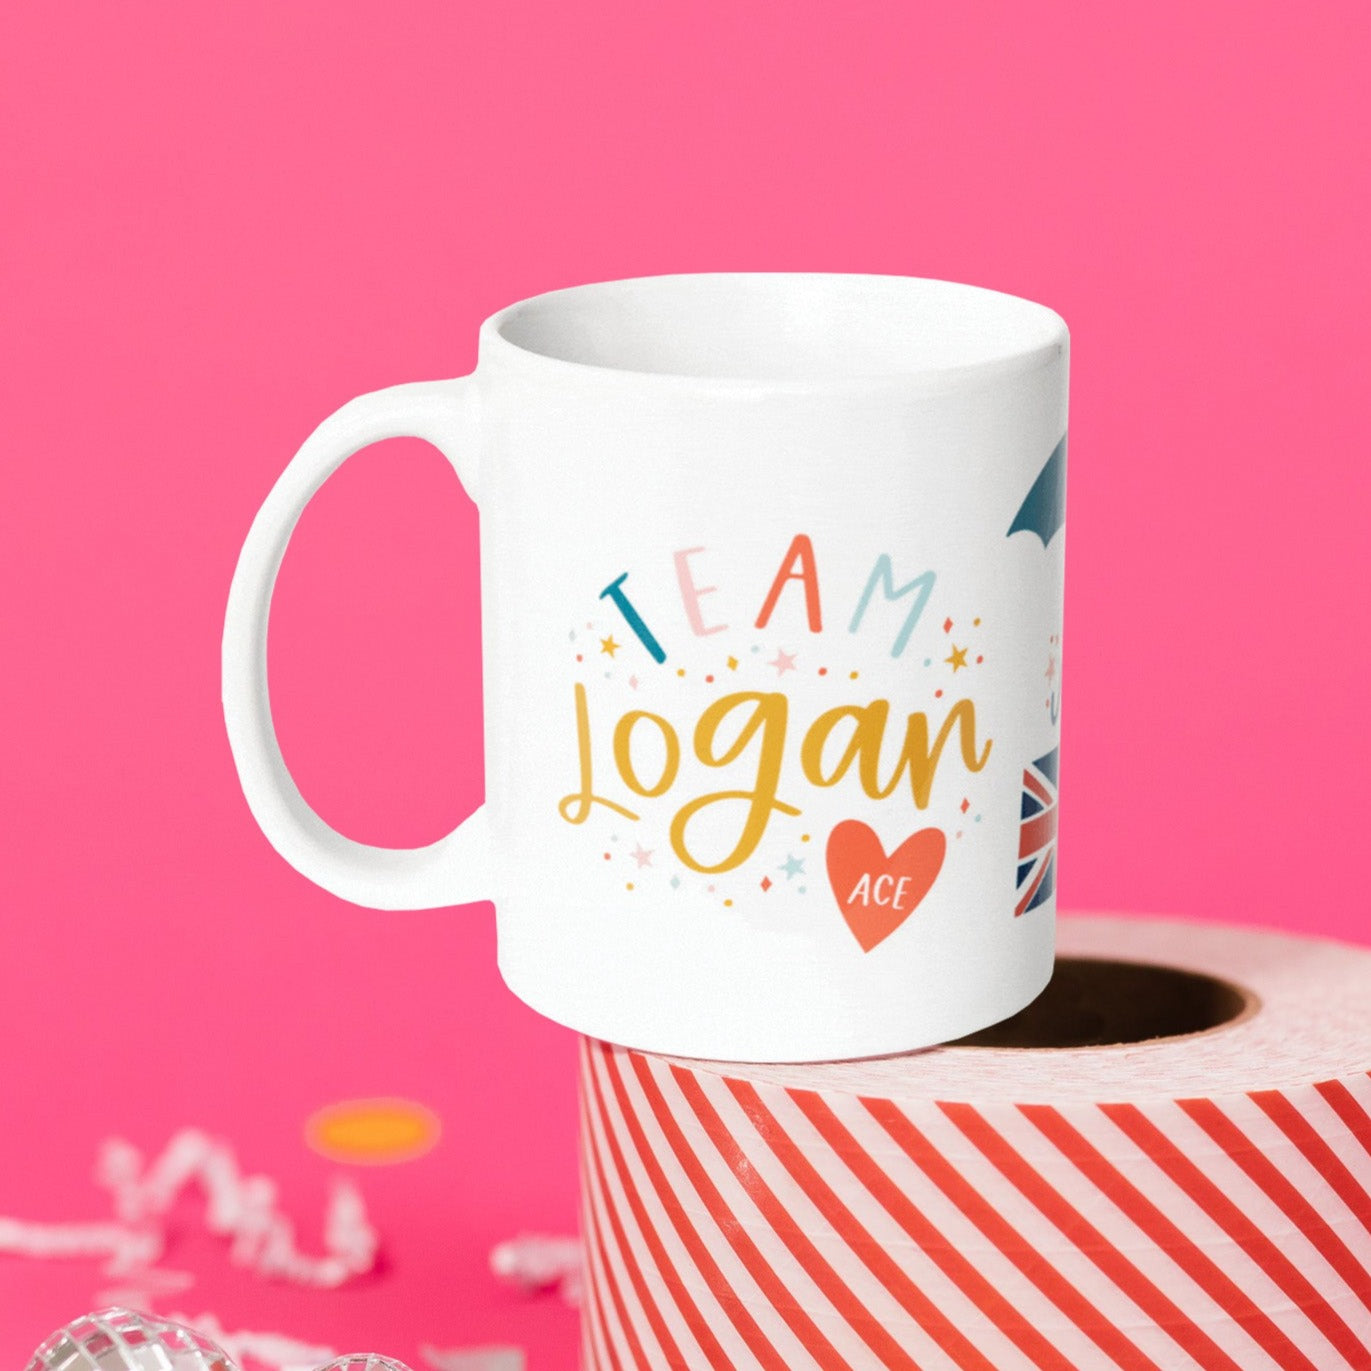 On a hot pink background sits a mug atop a red and white striped roll of packing tape with white crinkle and big, colorful confetti scattered around. There are mini disco balls. This Gilmore Girls inspired white mug says "TEAM Logan" in a colorful, handwritten lettering. There are stars and colorful dots and a red heart at the bottom that says "ACE" in white handwritten lettering.